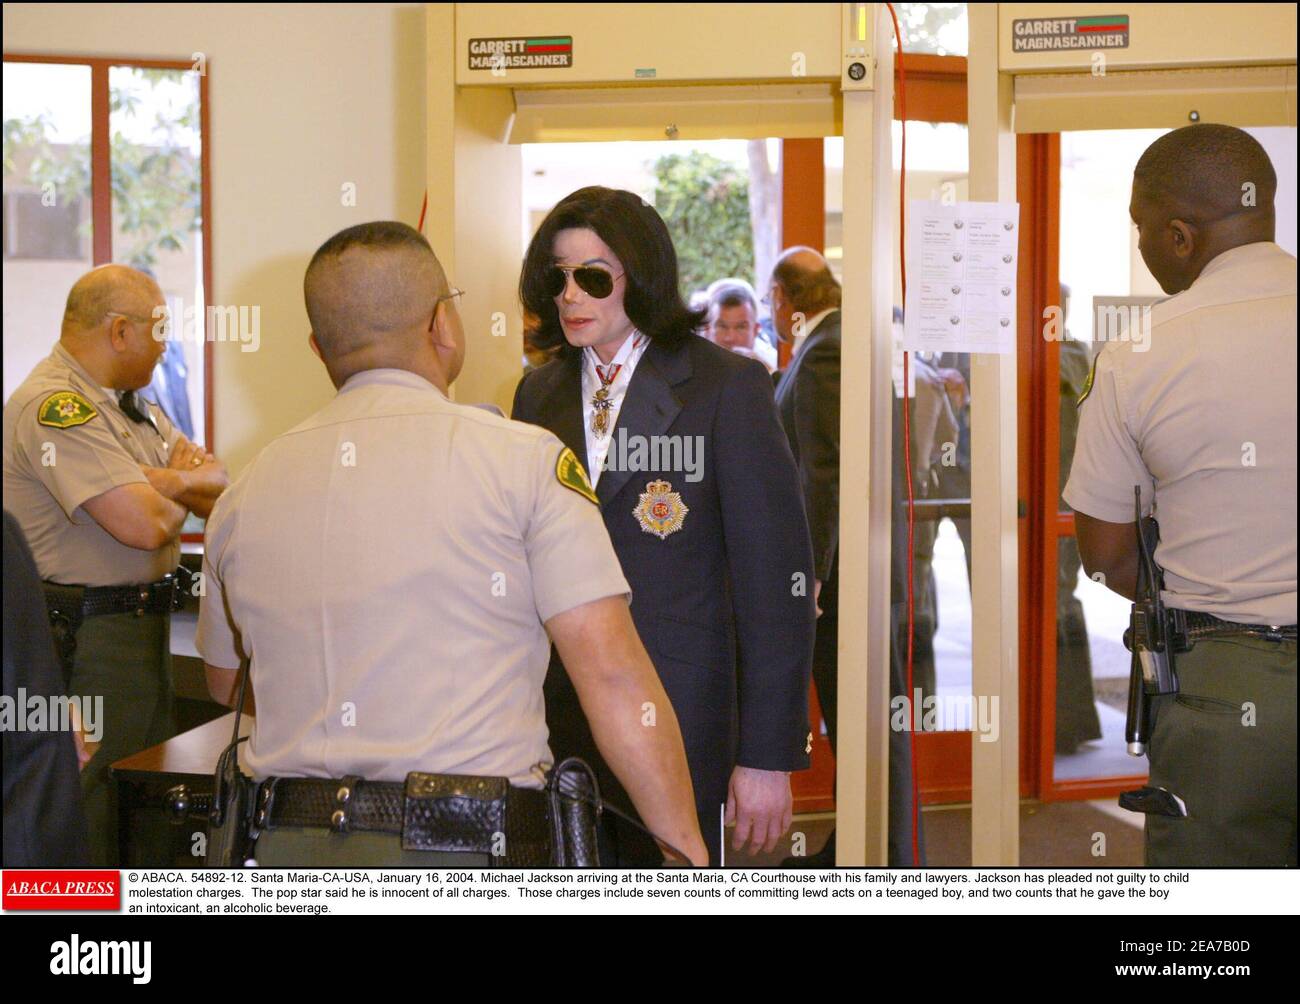 © ABACA. 54892-12. Santa Maria-CA-USA, January 16, 2004. Michael Jackson arriving at the Santa Maria, CA Courthouse with his family and lawyers. Jackson has pleaded not guilty to child molestation charges. The pop star said he is innocent of all charges. Those charges include seven counts of committing lewd acts on a teenaged boy, and two counts that he gave the boy an intoxicant, an alcoholic beverage. Stock Photo